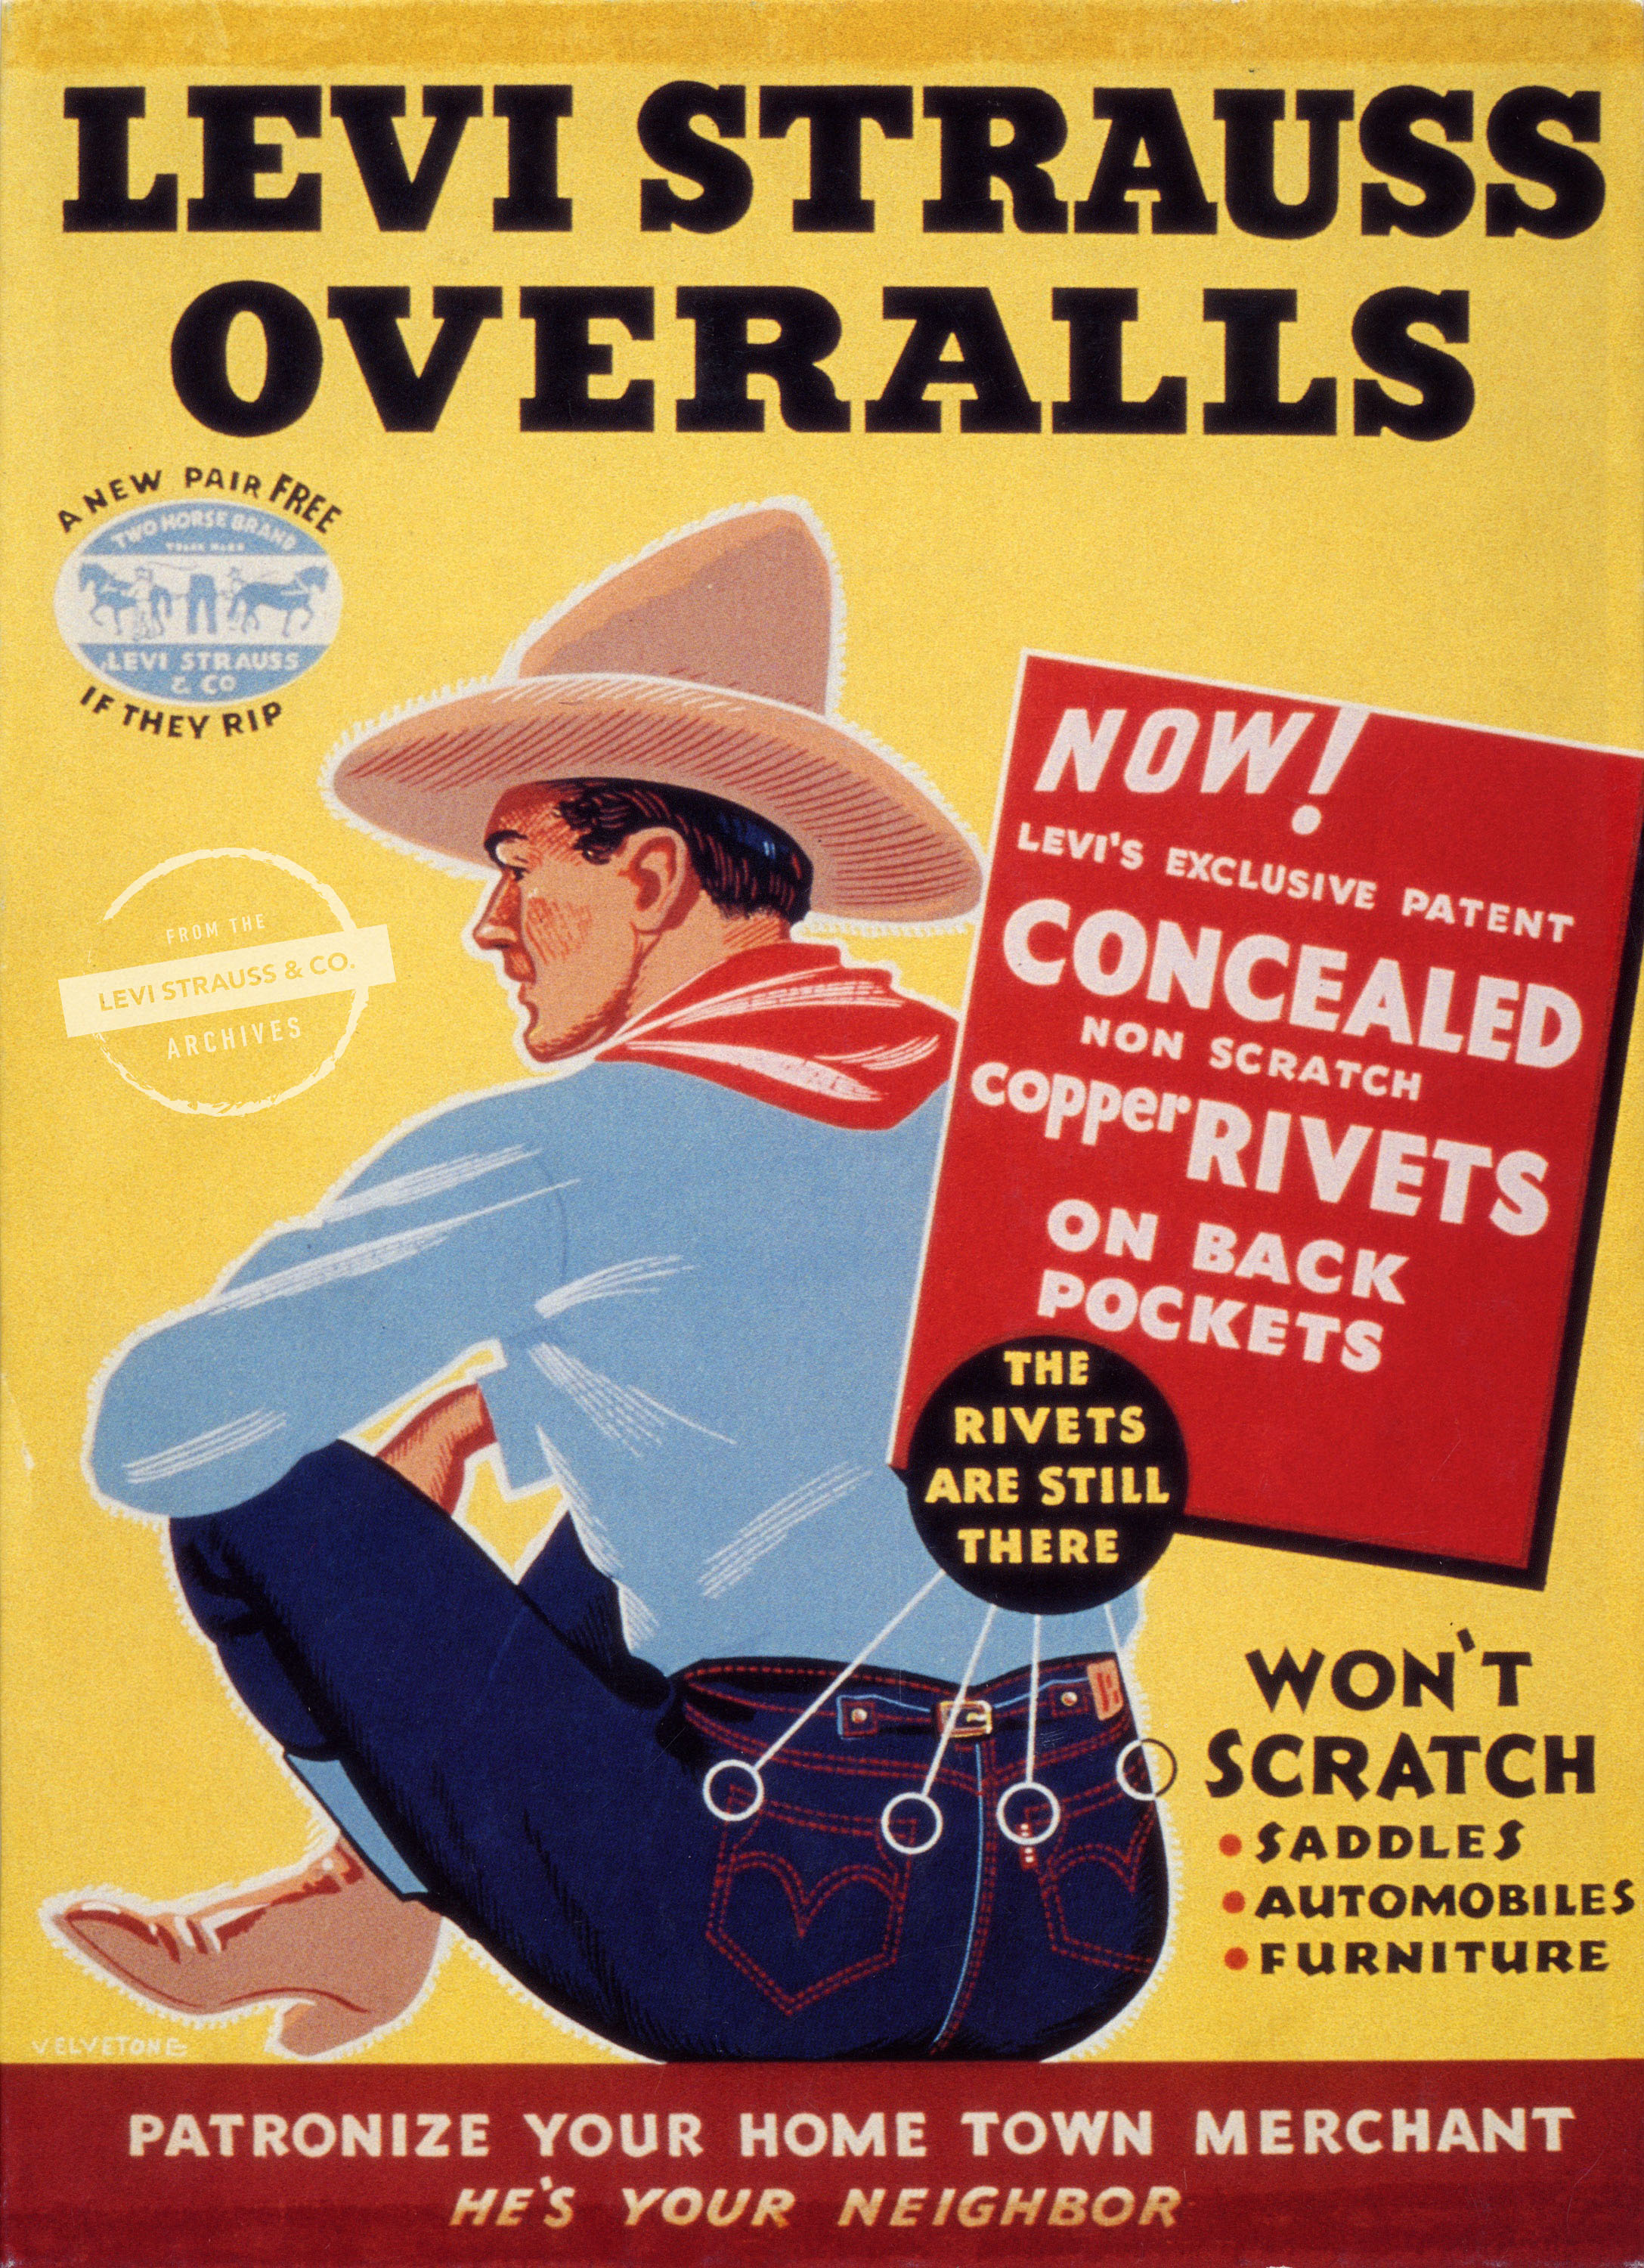 Pockets Full of History - Levi Strauss & Co : Levi Strauss & Co